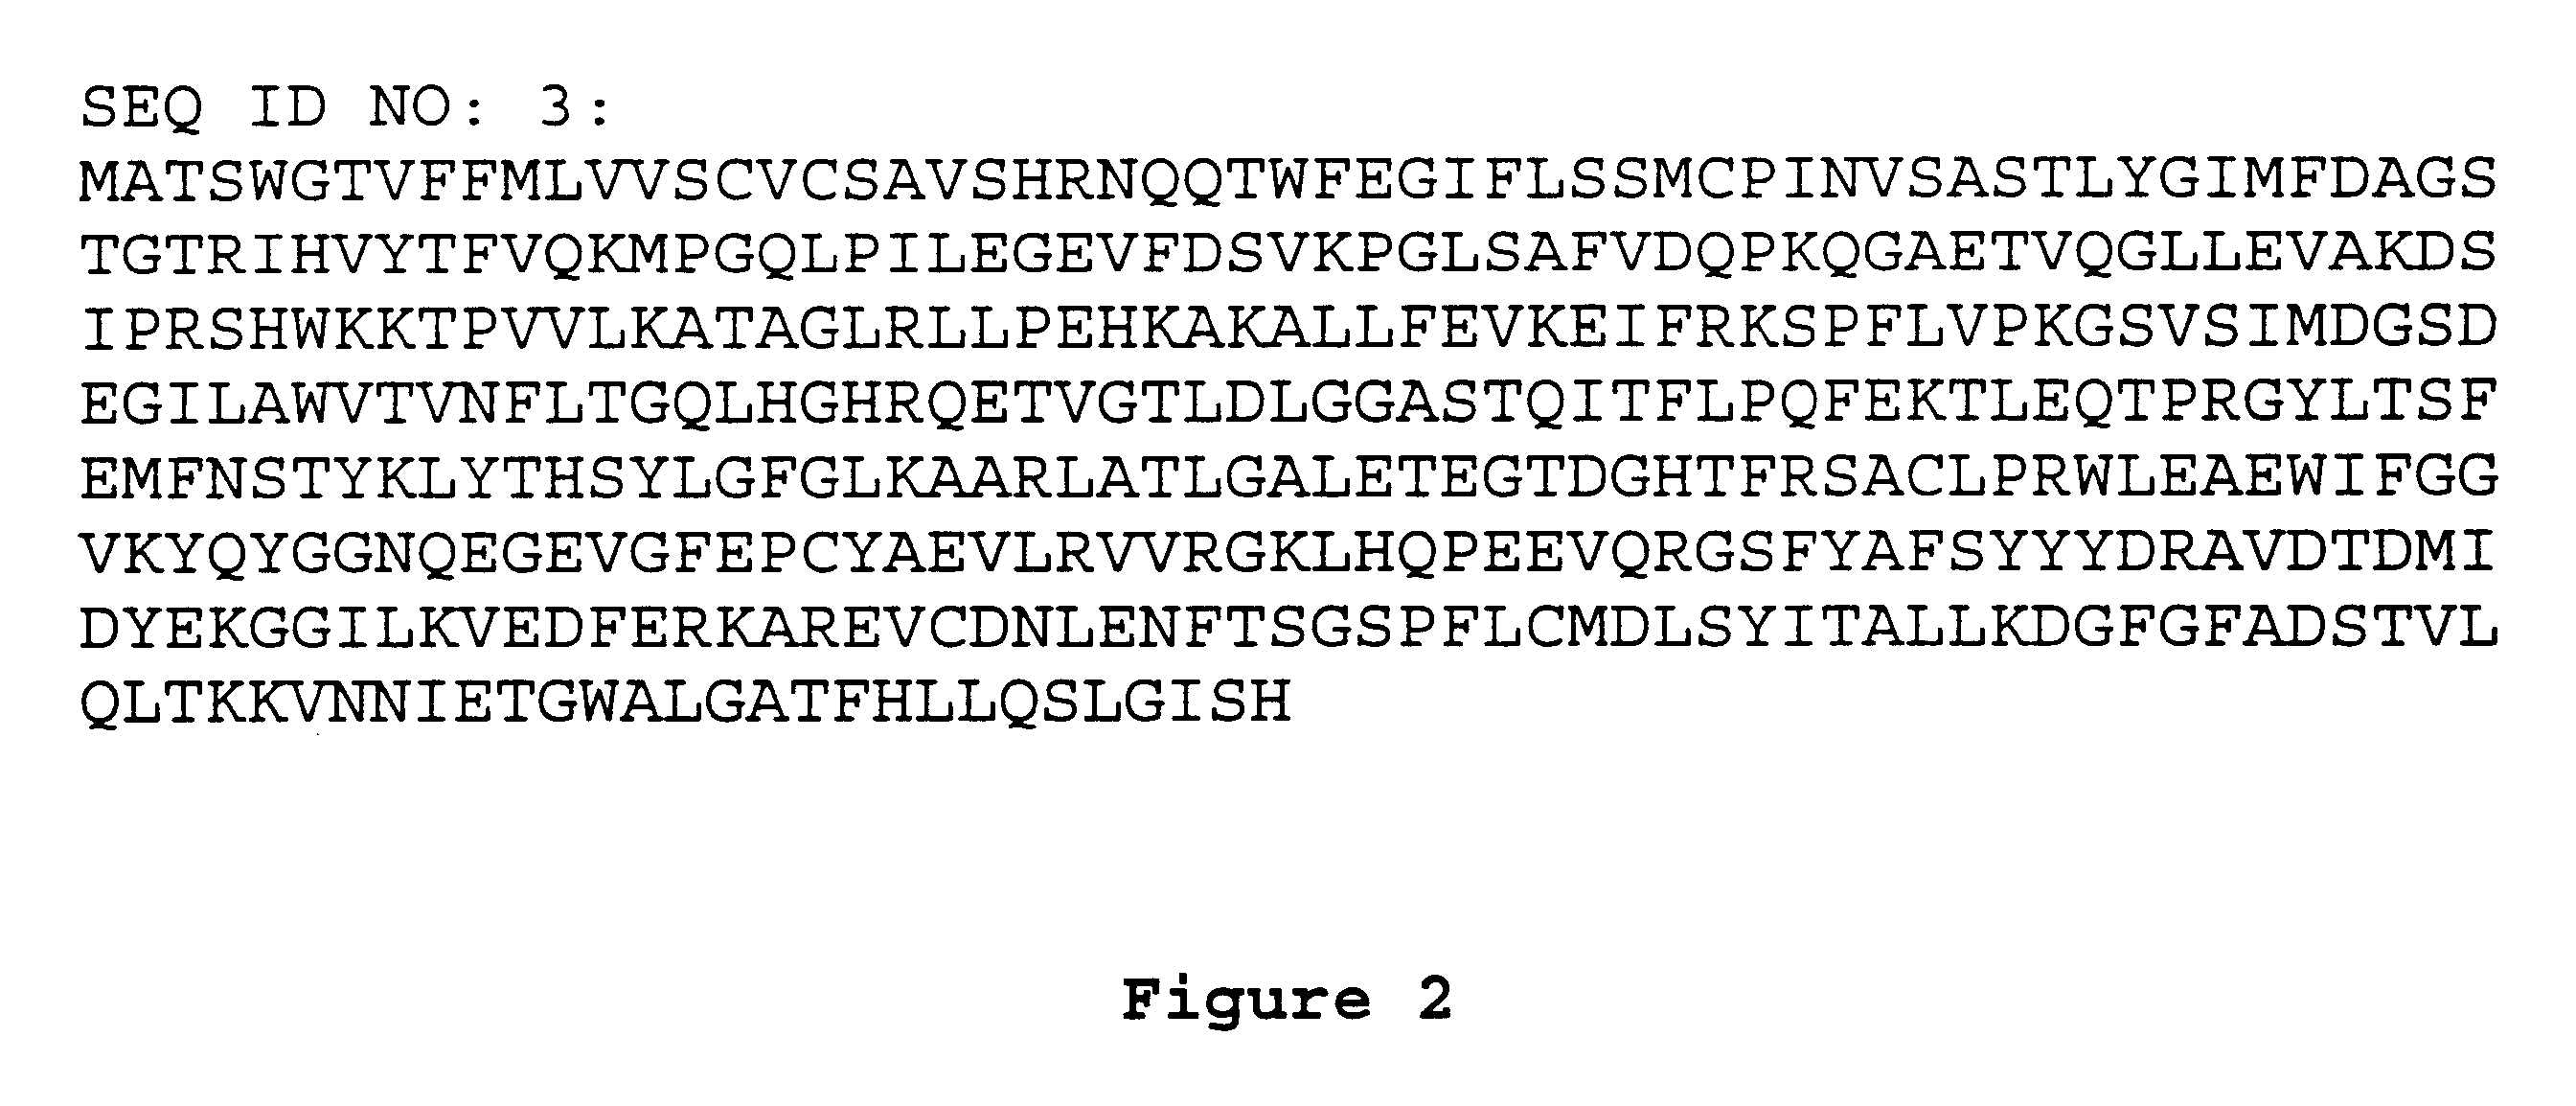 Methods and materials relating to novel CD39-like polypeptides